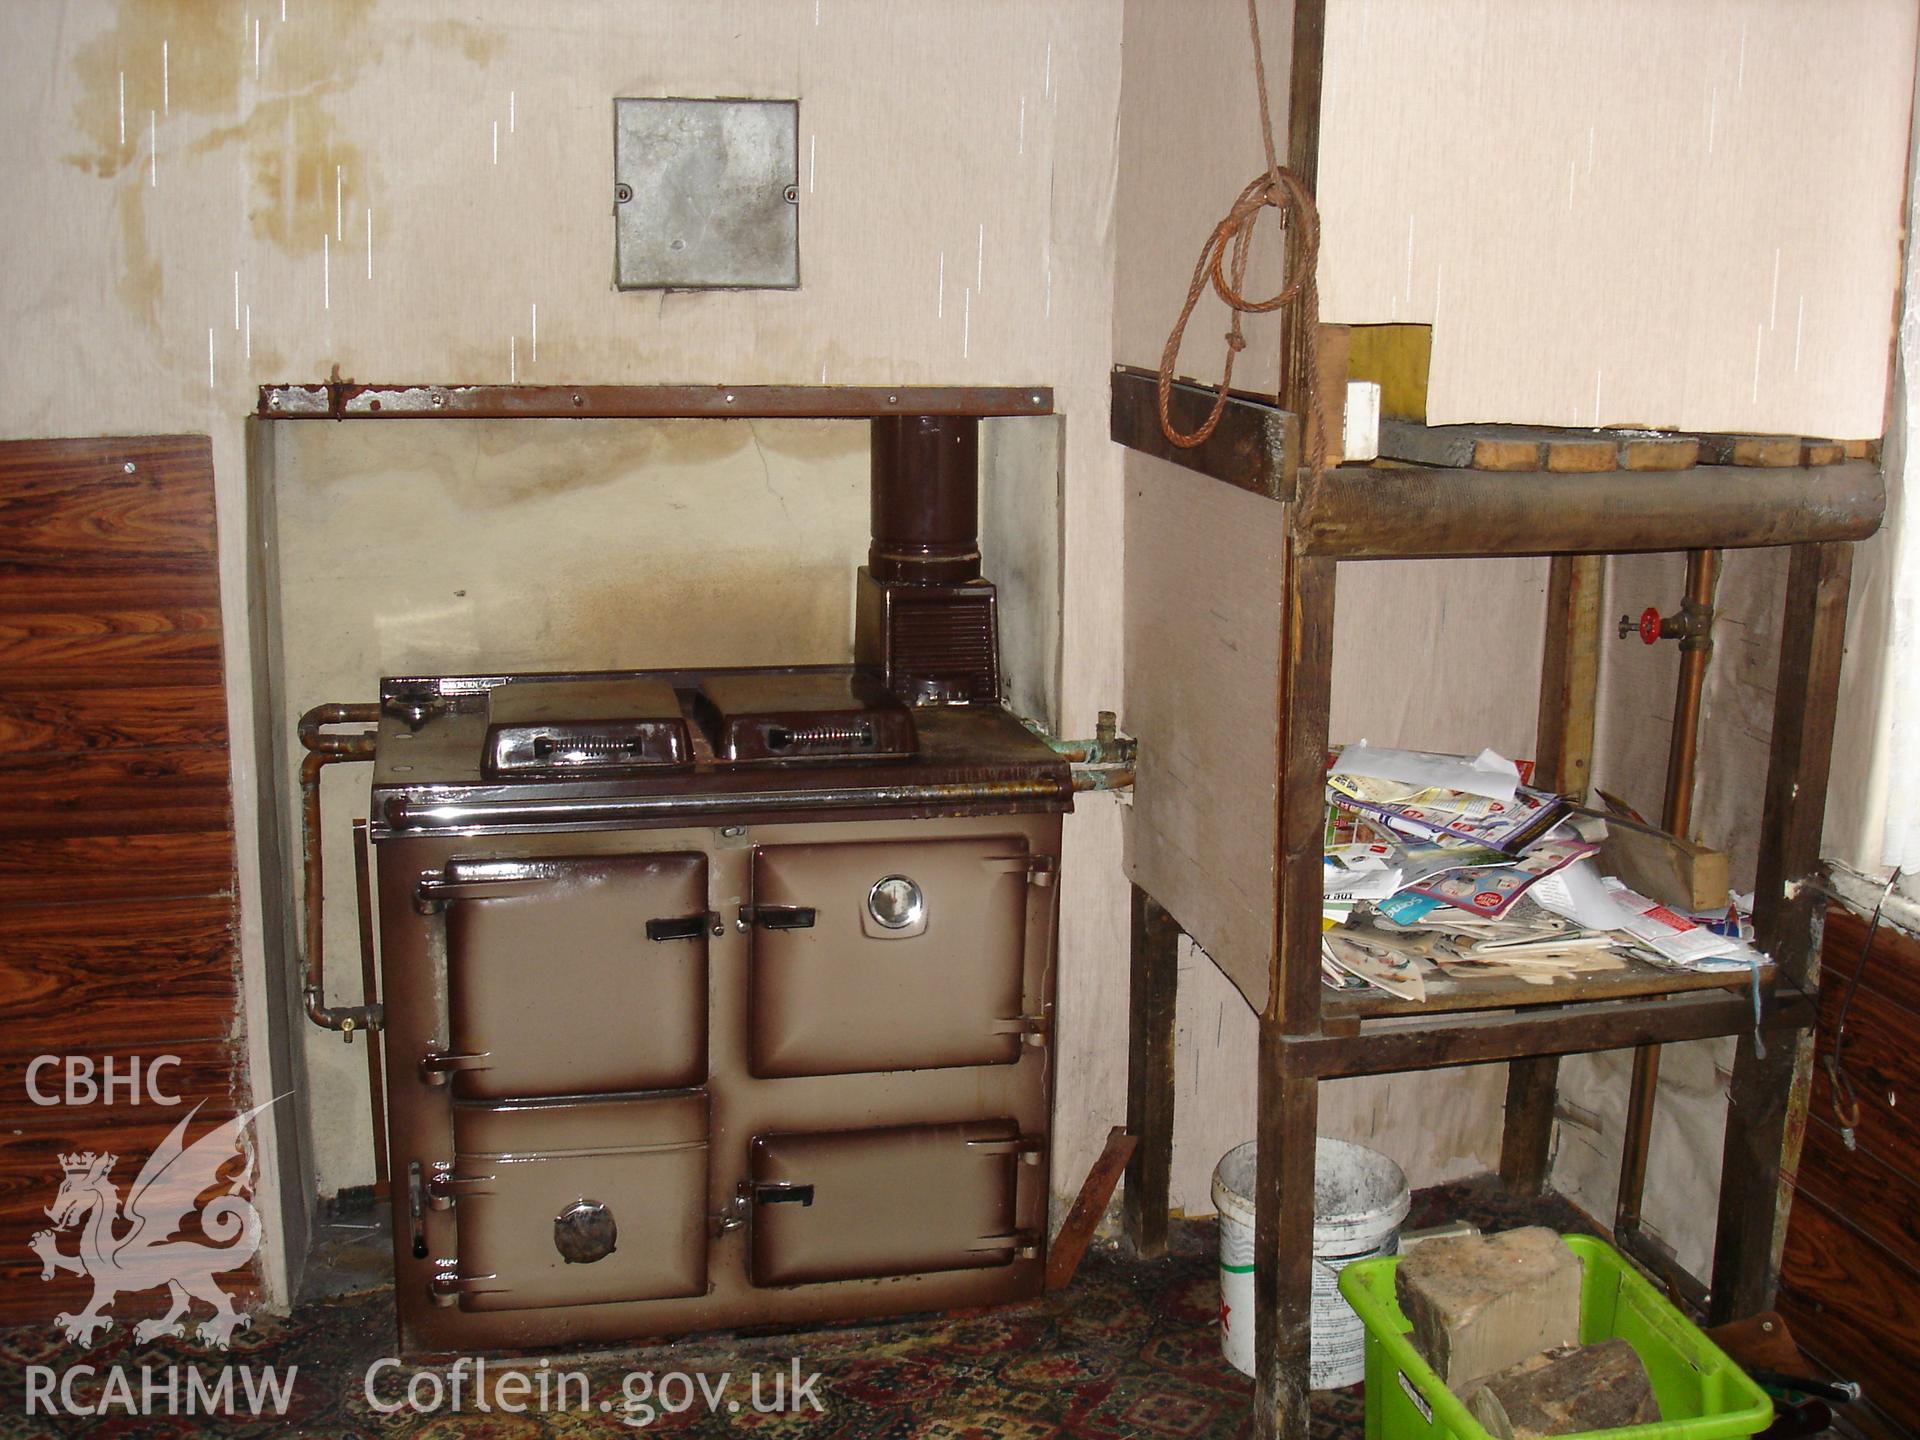 Colour digital photograph showing interior view of a cottage at Gelli Houses, Cymmer.